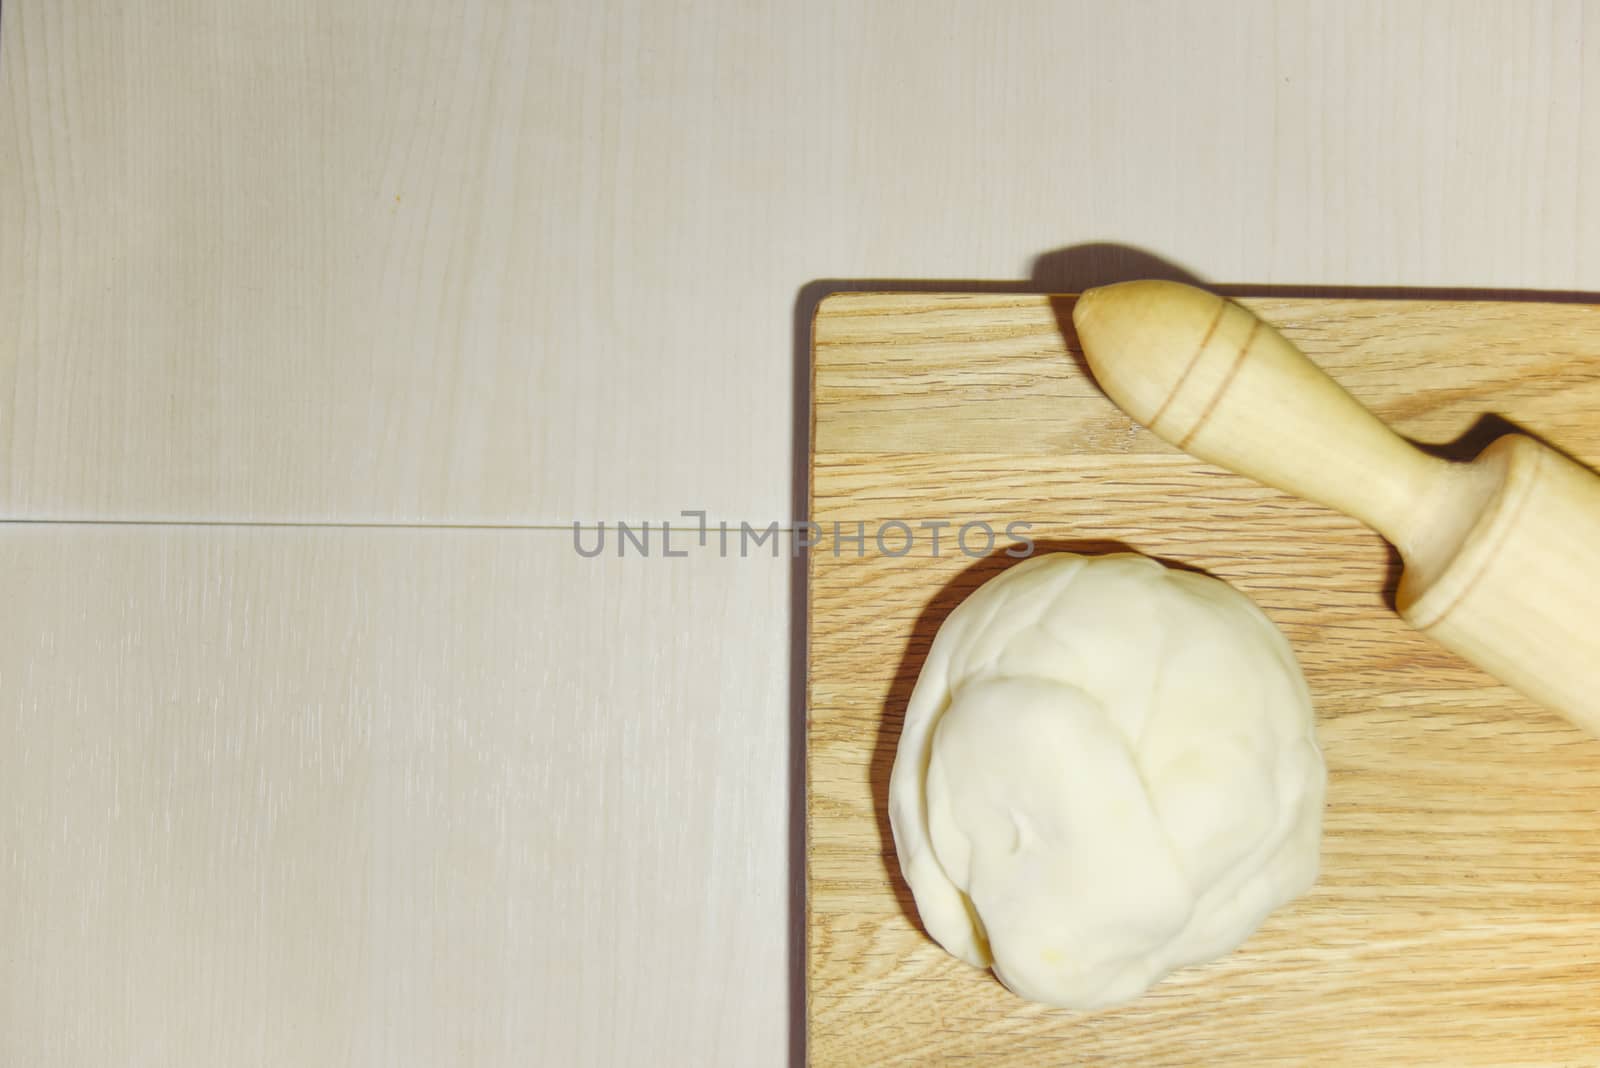 focus on the wooden chopping board and blury dough and roller. cooking concept